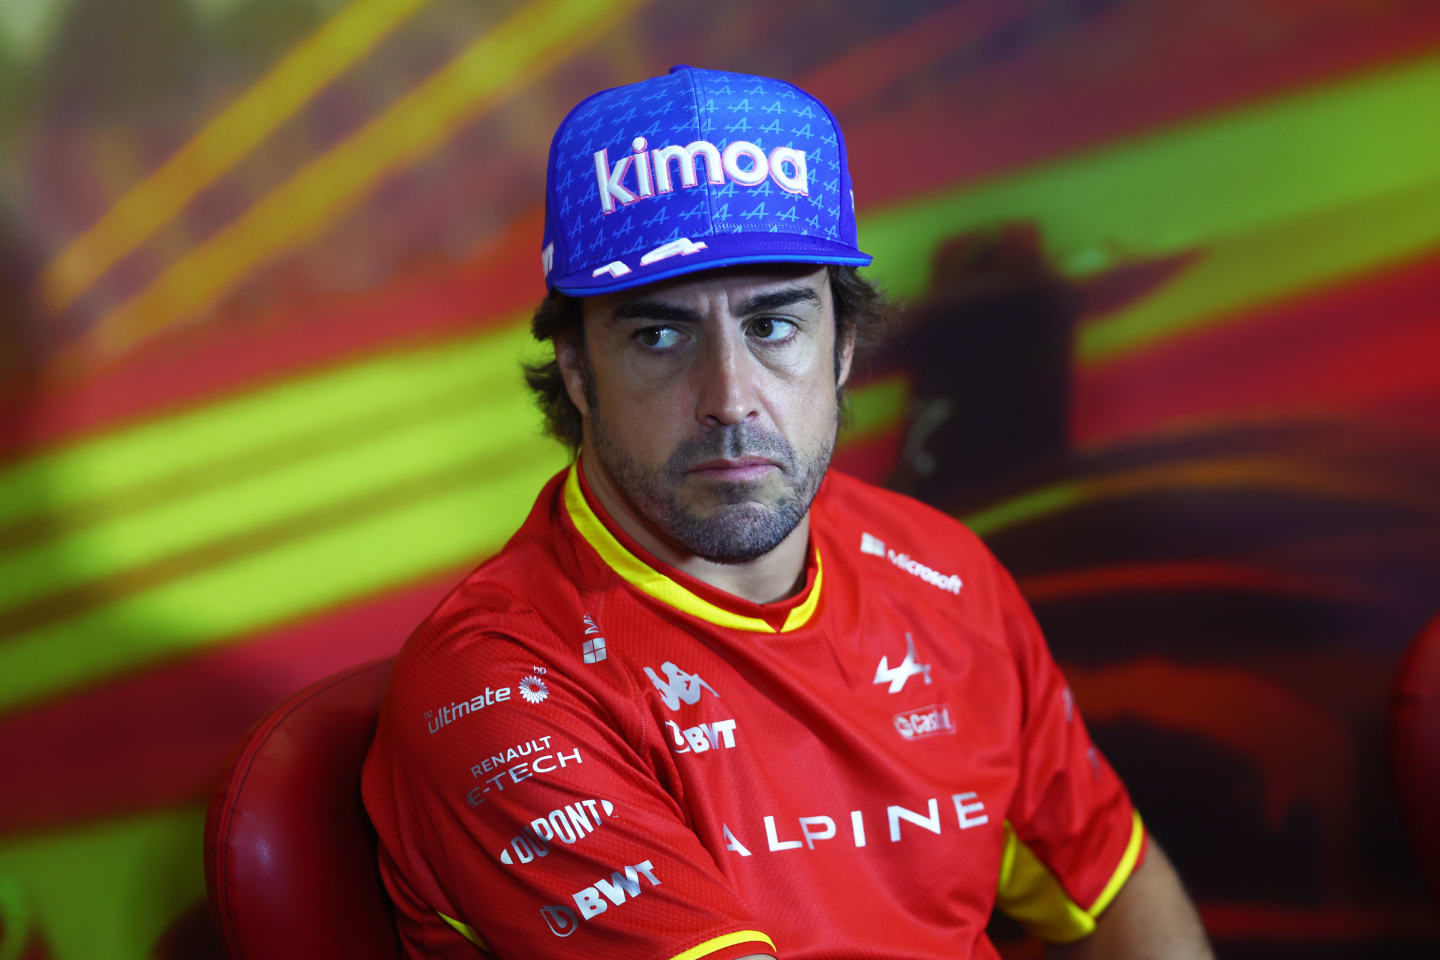 BARCELONA, SPAIN - MAY 20: Fernando Alonso of Spain and Alpine F1 looks on in the Drivers Press Conference prior to practice ahead of the F1 Grand Prix of Spain at Circuit de Barcelona-Catalunya on May 20, 2022 in Barcelona, Spain. (Photo by Lars Baron/Getty Images)